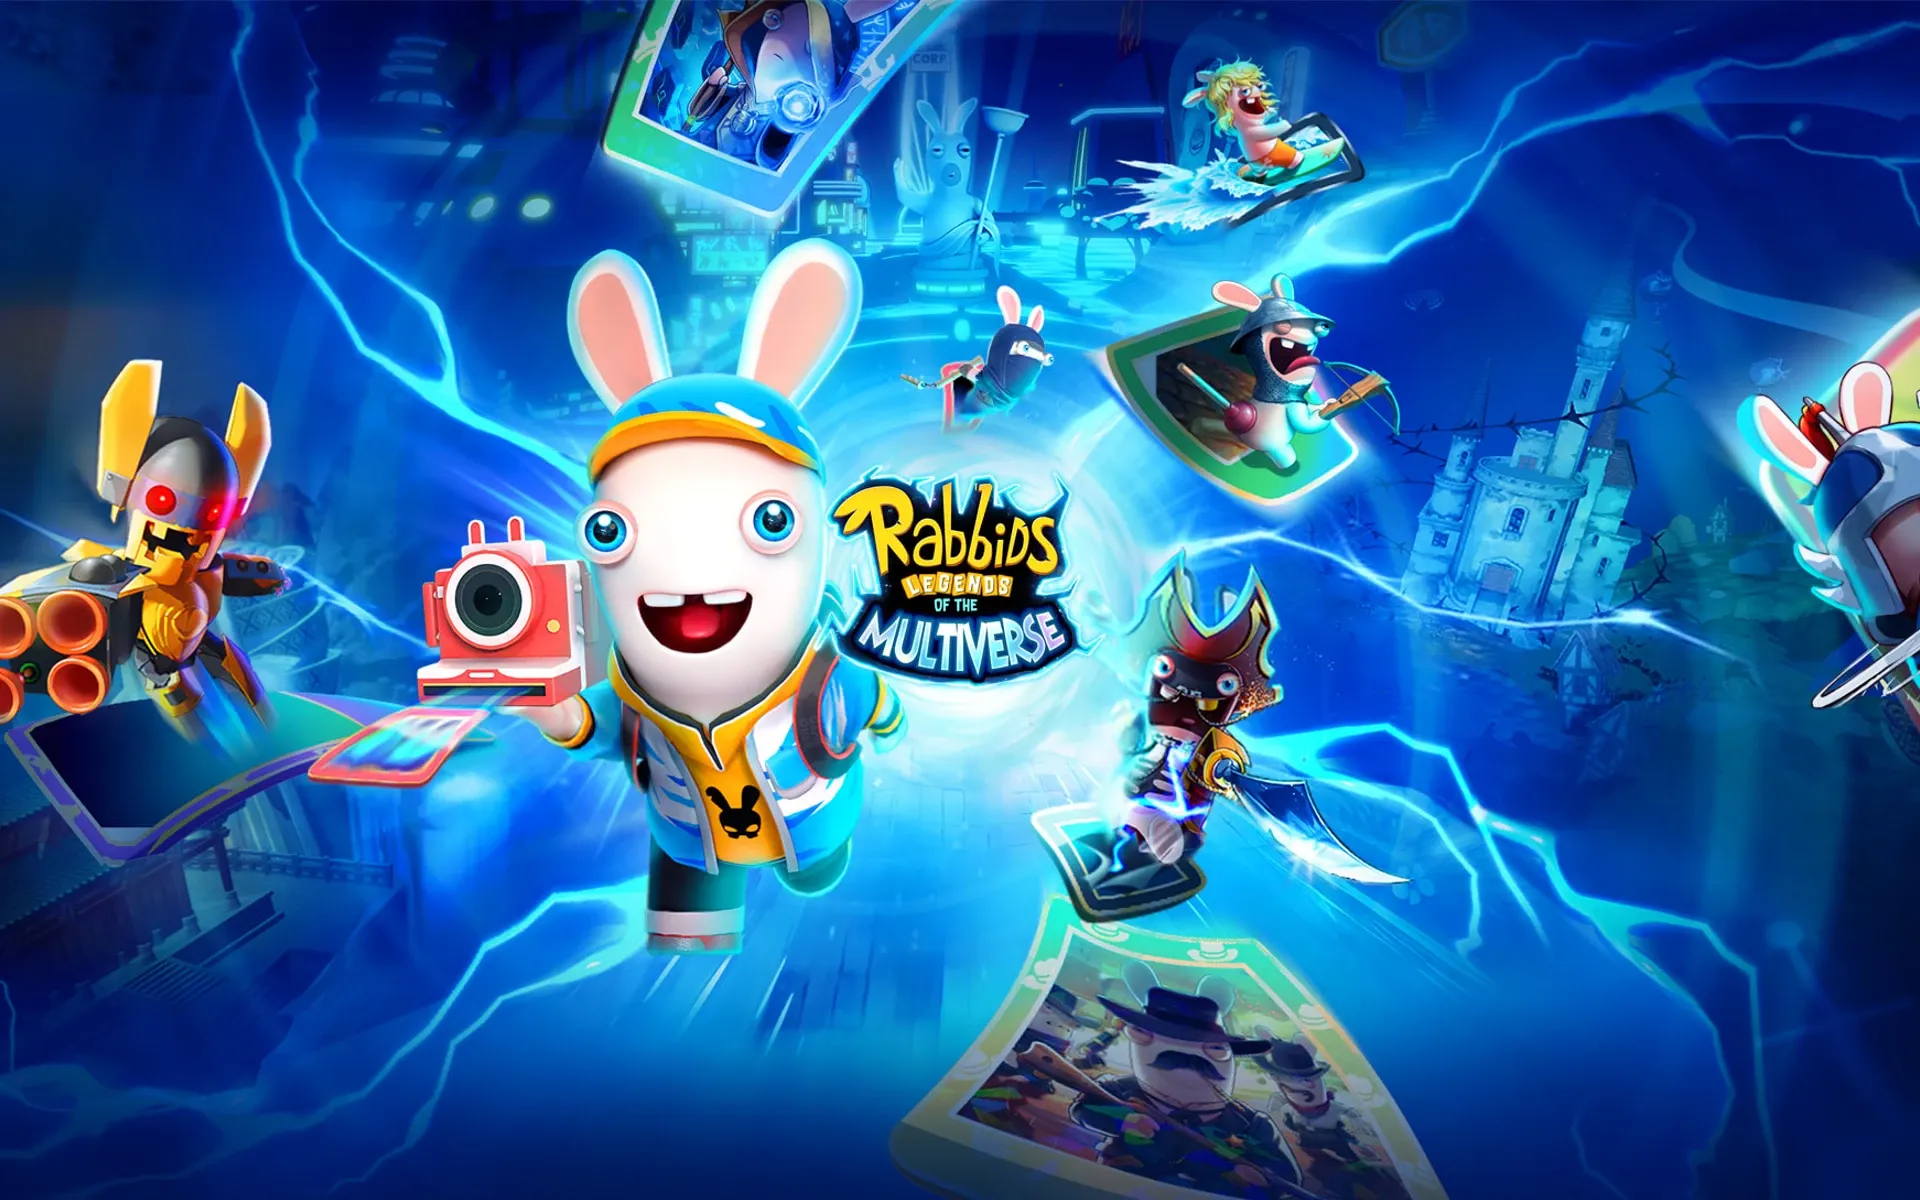 Rabbids: Legends of the Multiverse by Ubisoft